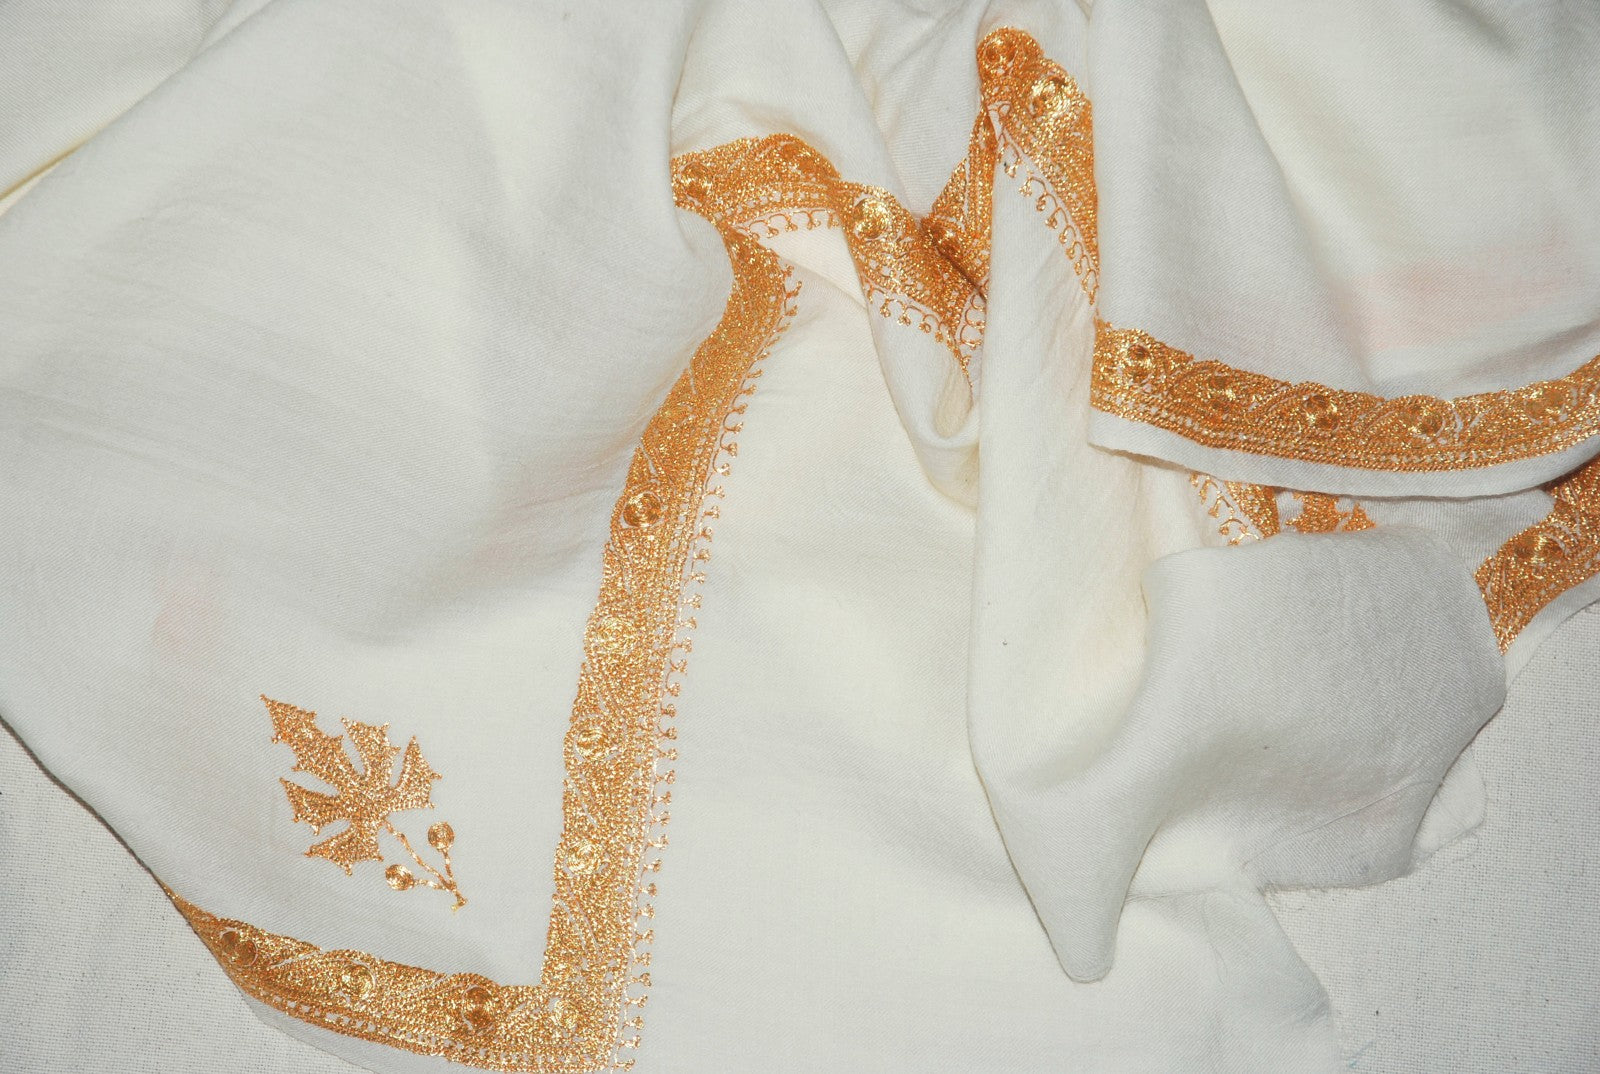 Embroidered Wool Shawl White, Gold "Tilla" Sozni Embroidery #WS-921